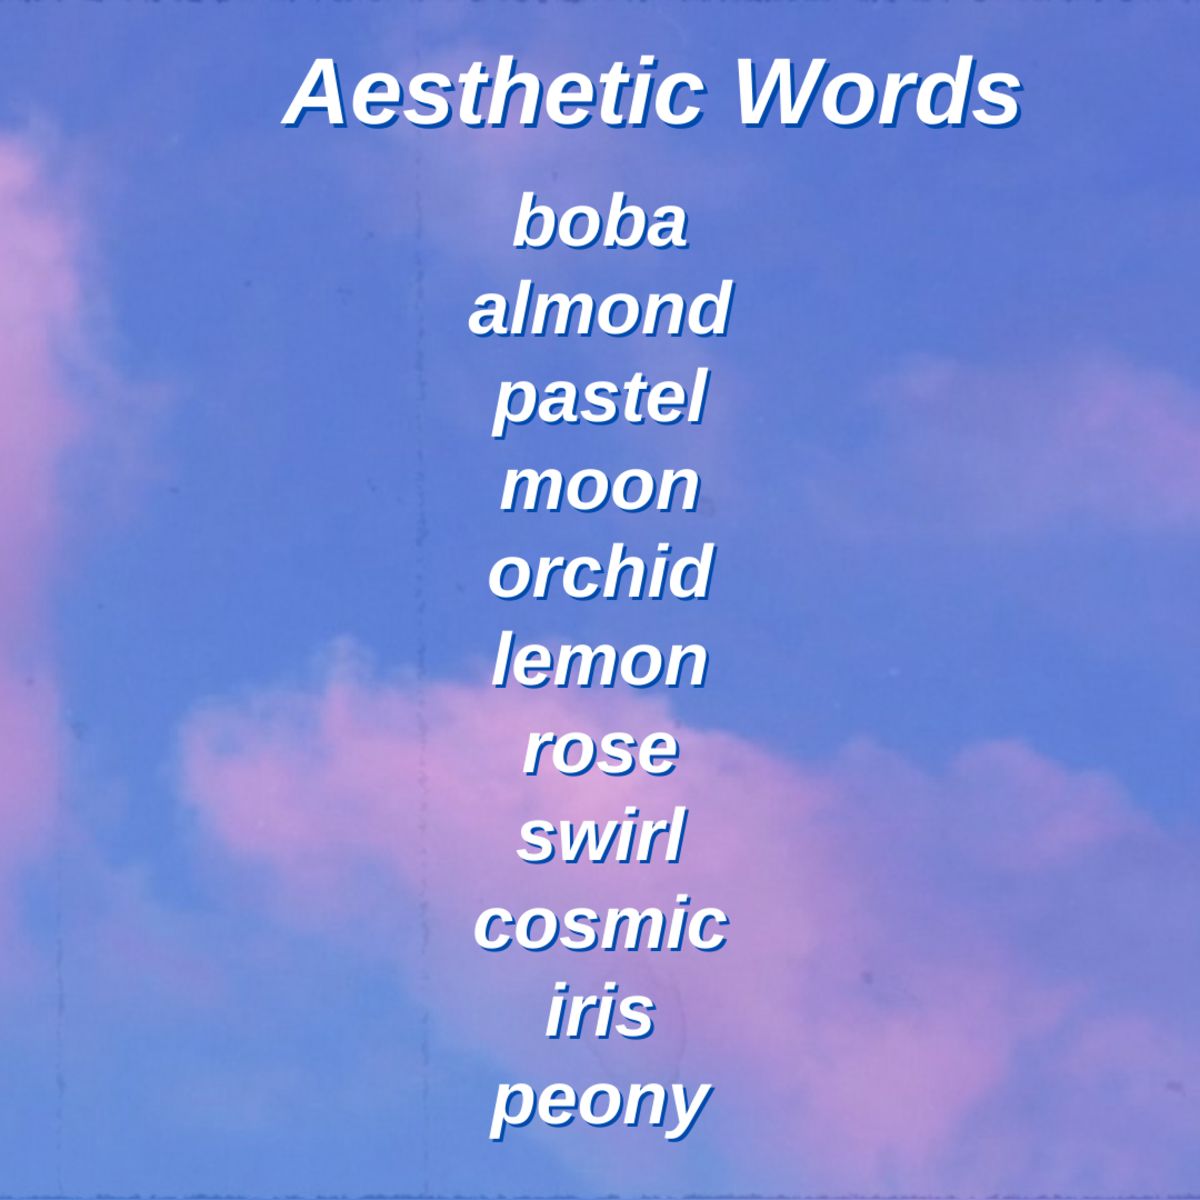 Here are some aesthetic words to help you get started!